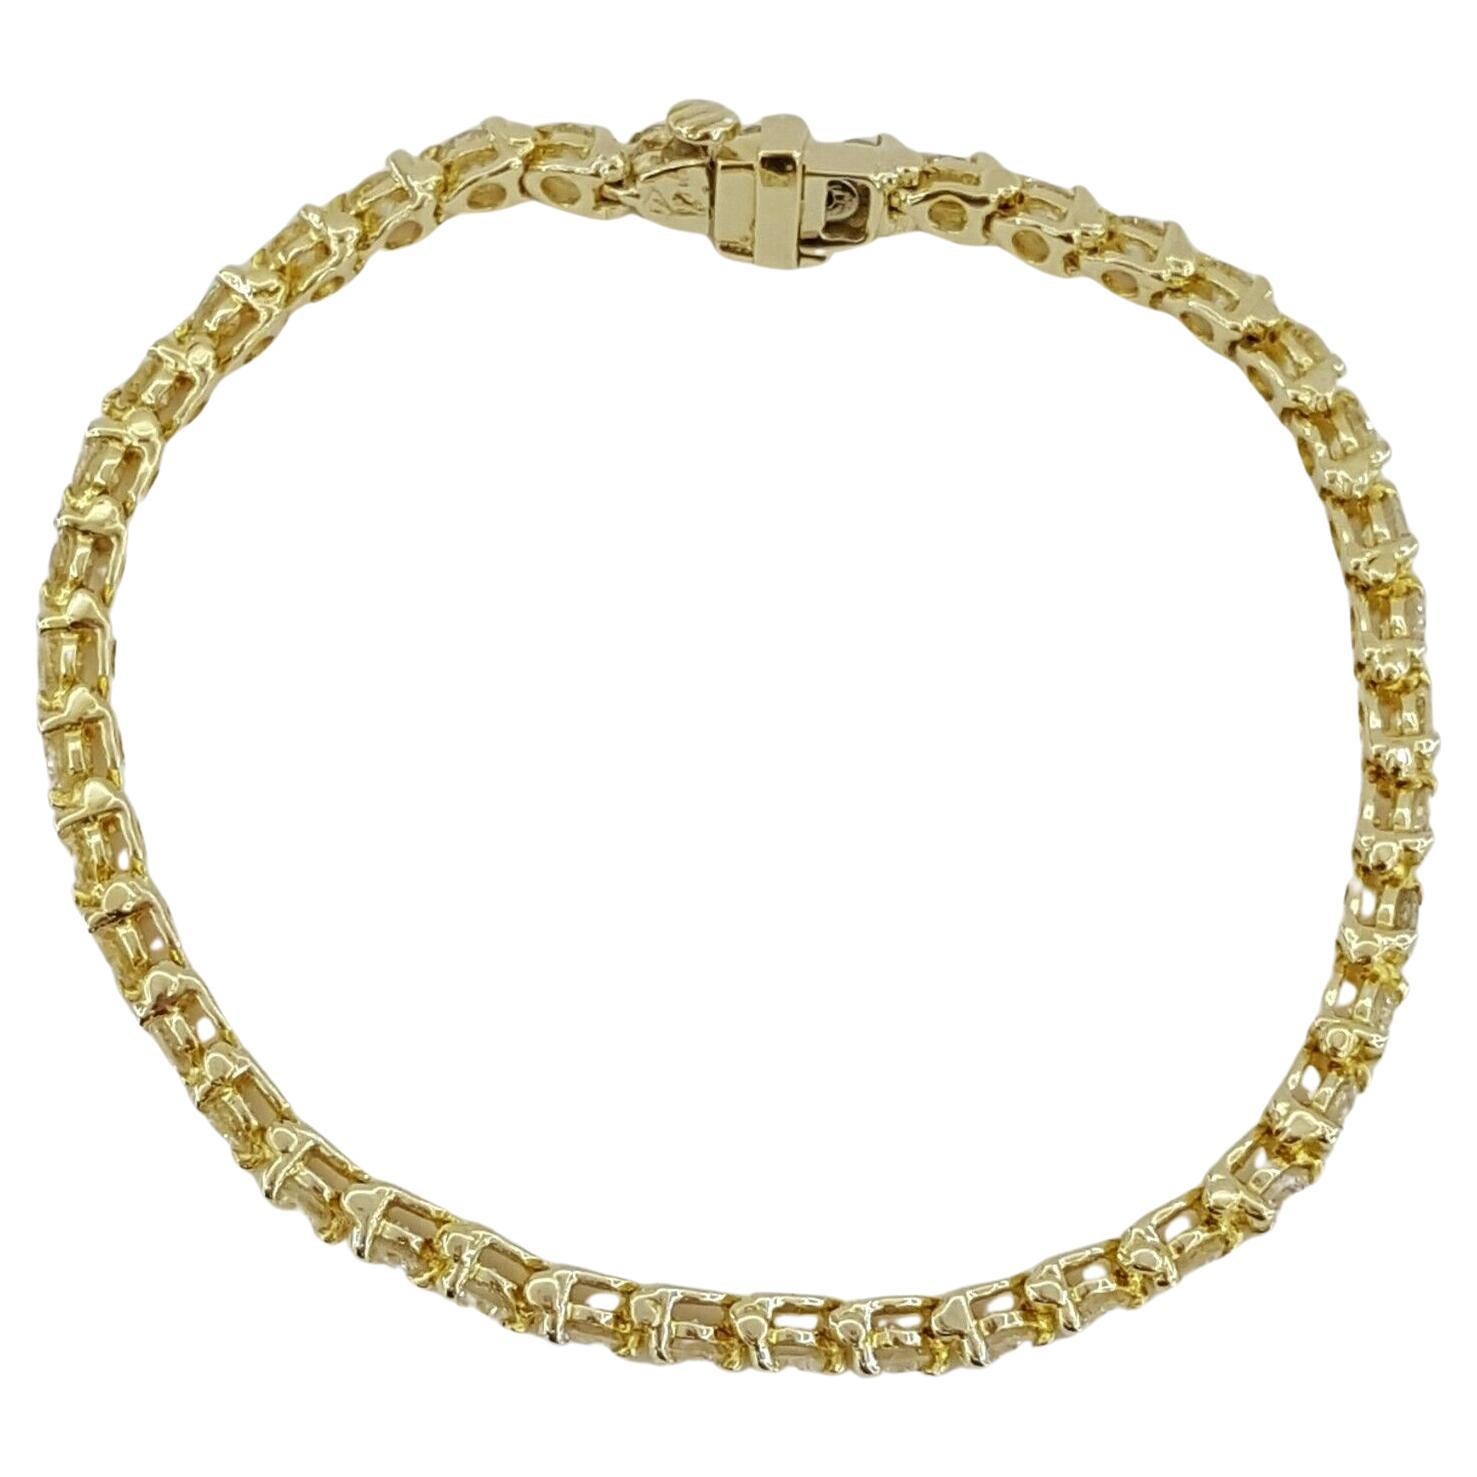 Presenting a radiant tennis bracelet that beautifully combines classic elegance with a dazzling display of light. Crafted in 14K yellow gold, this bracelet is a luxurious accessory for any occasion.

Key Details:
- The bracelet is set with 41